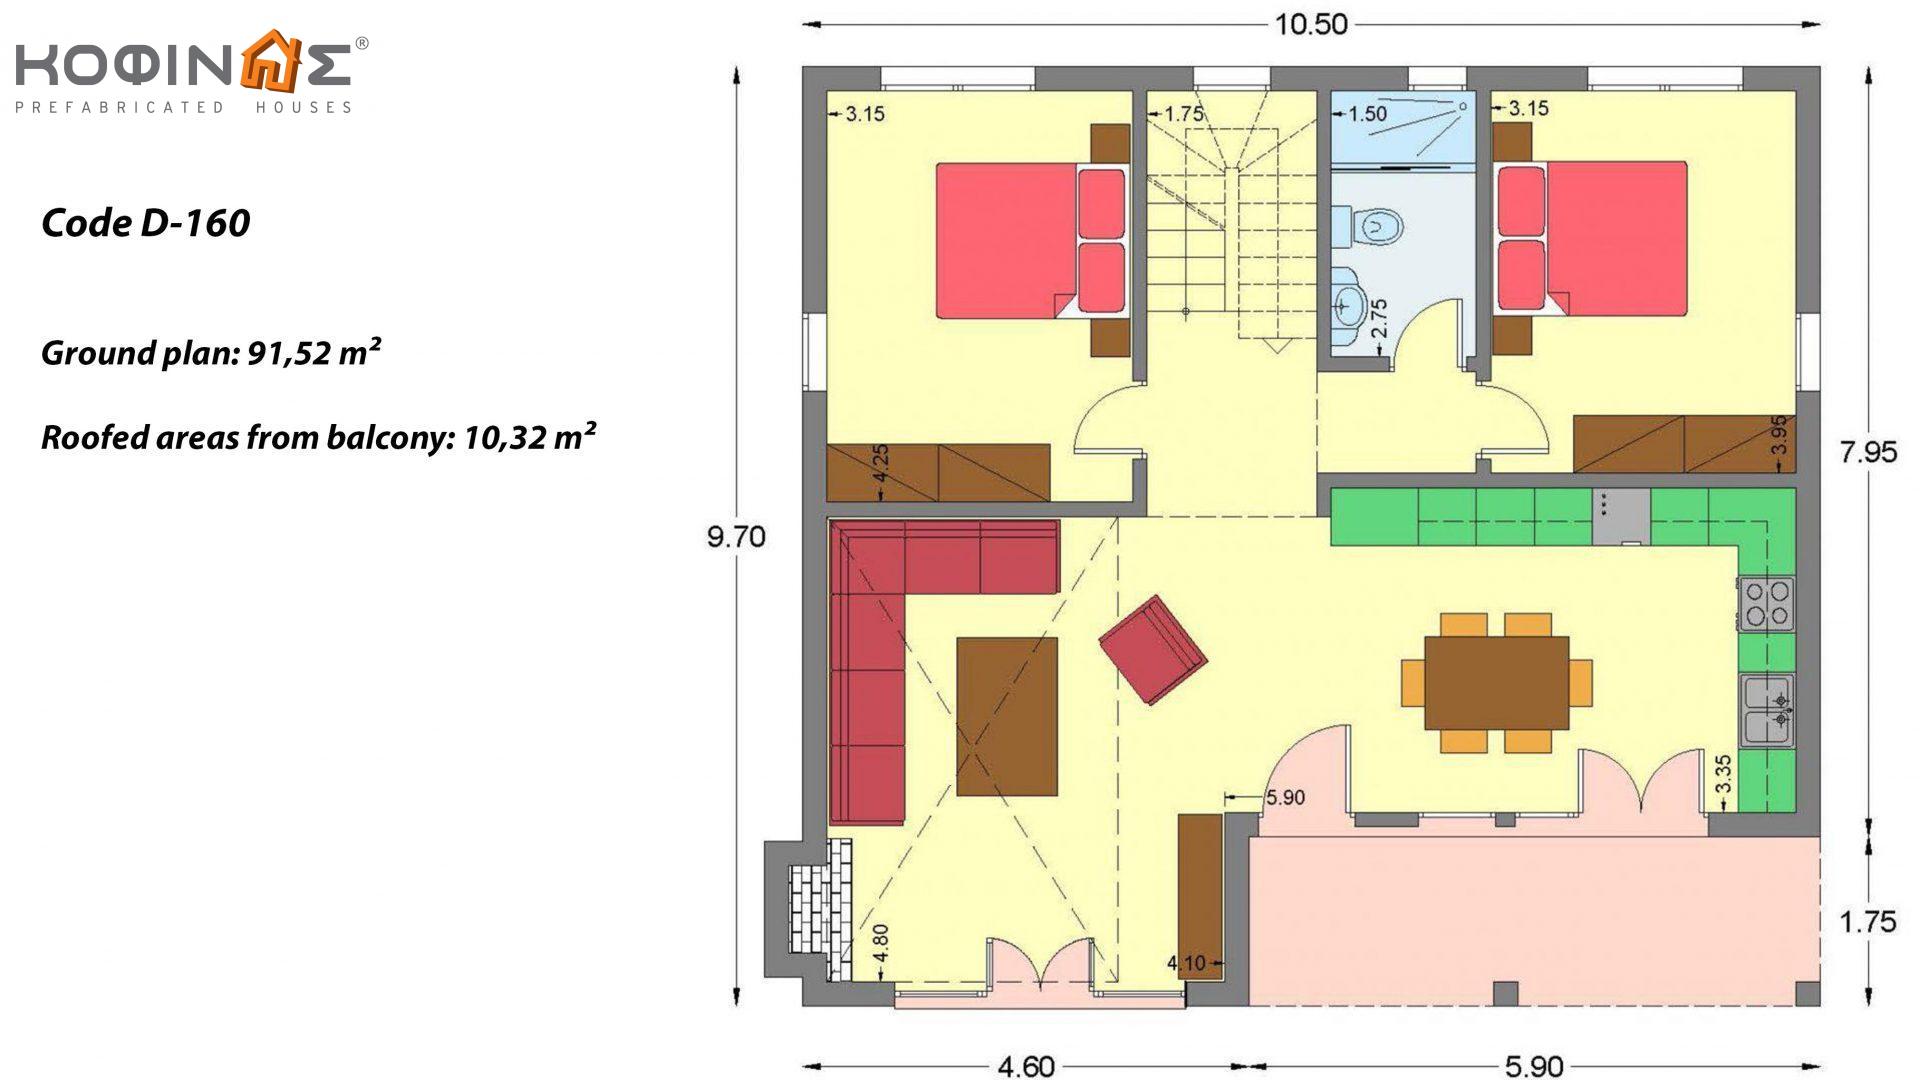 2-story house D-160, total surface 160.52 m² ,covered roofed areas 24.72 m²,balconies 10.32 m²